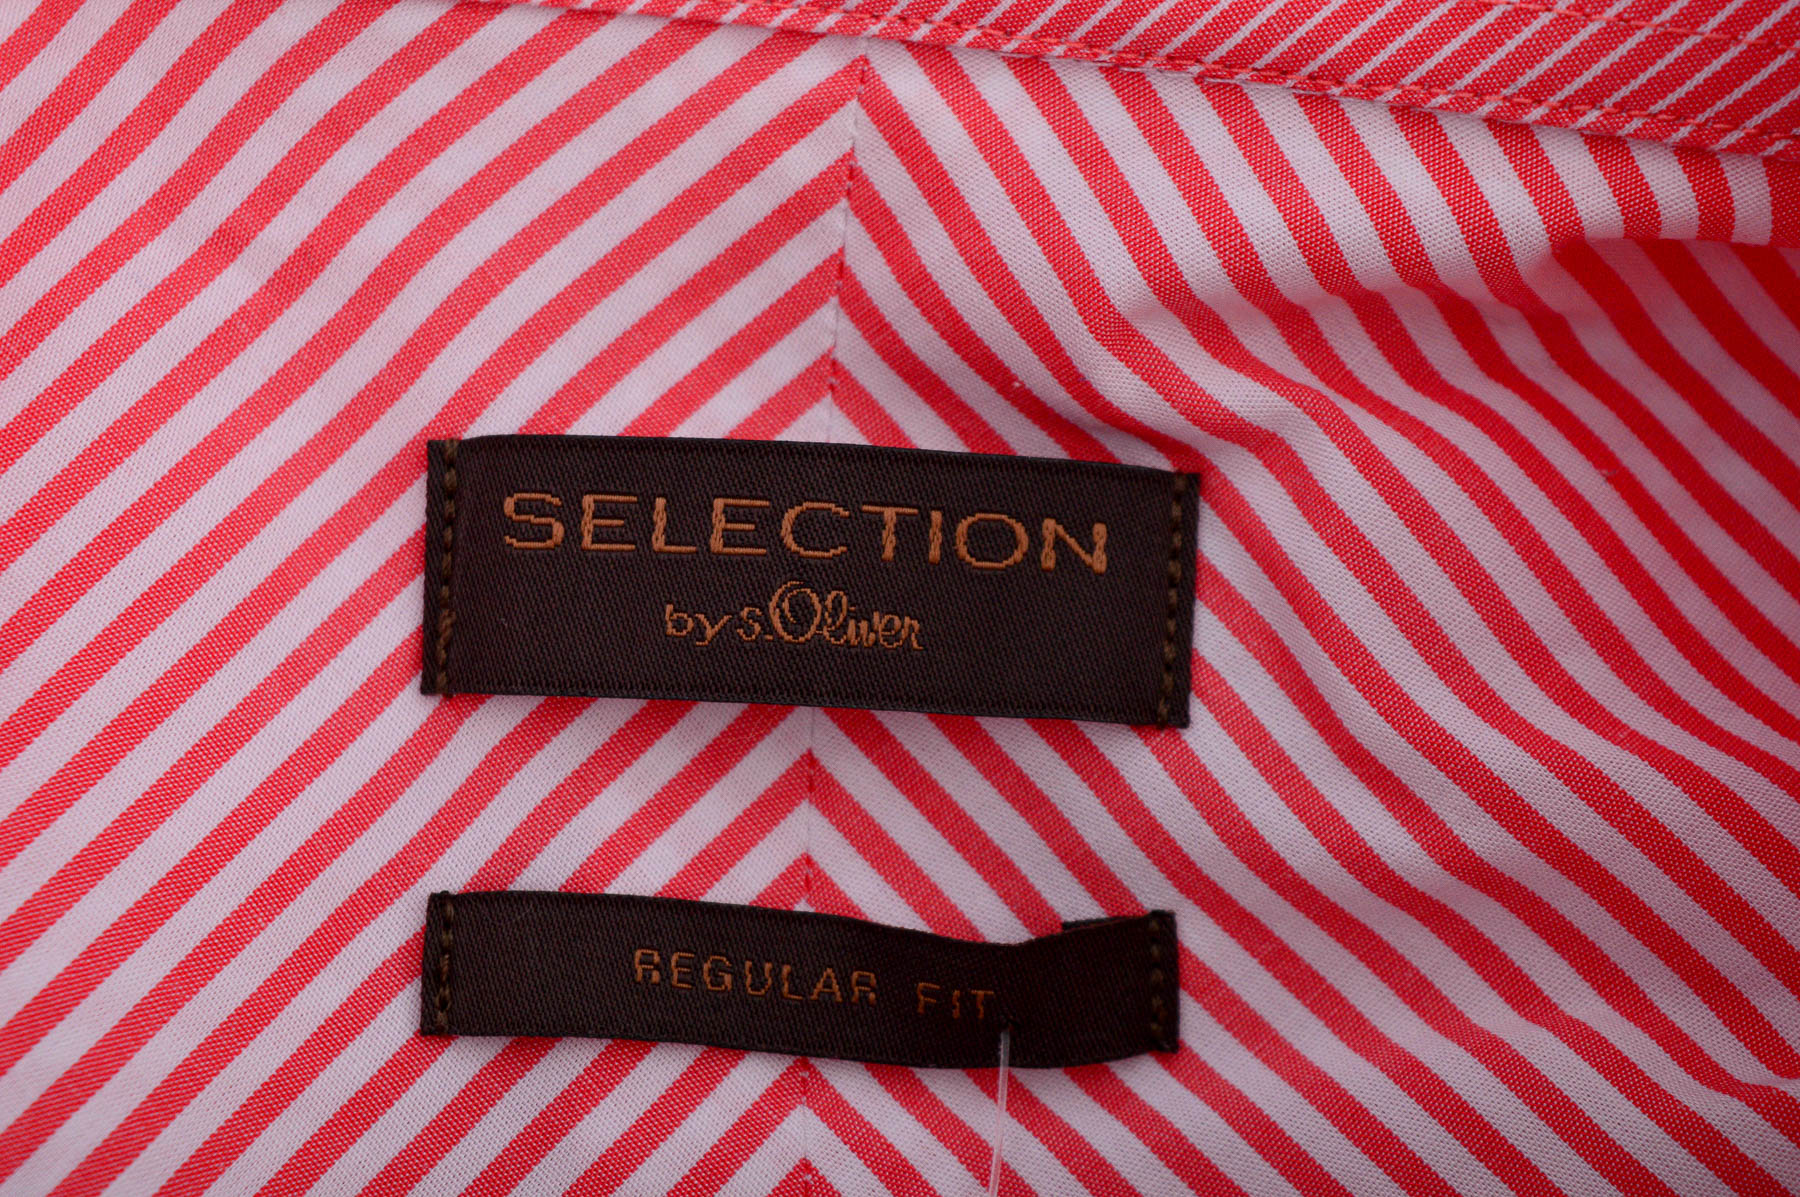 Men's shirt - SELECTION by S.Oliver - 2